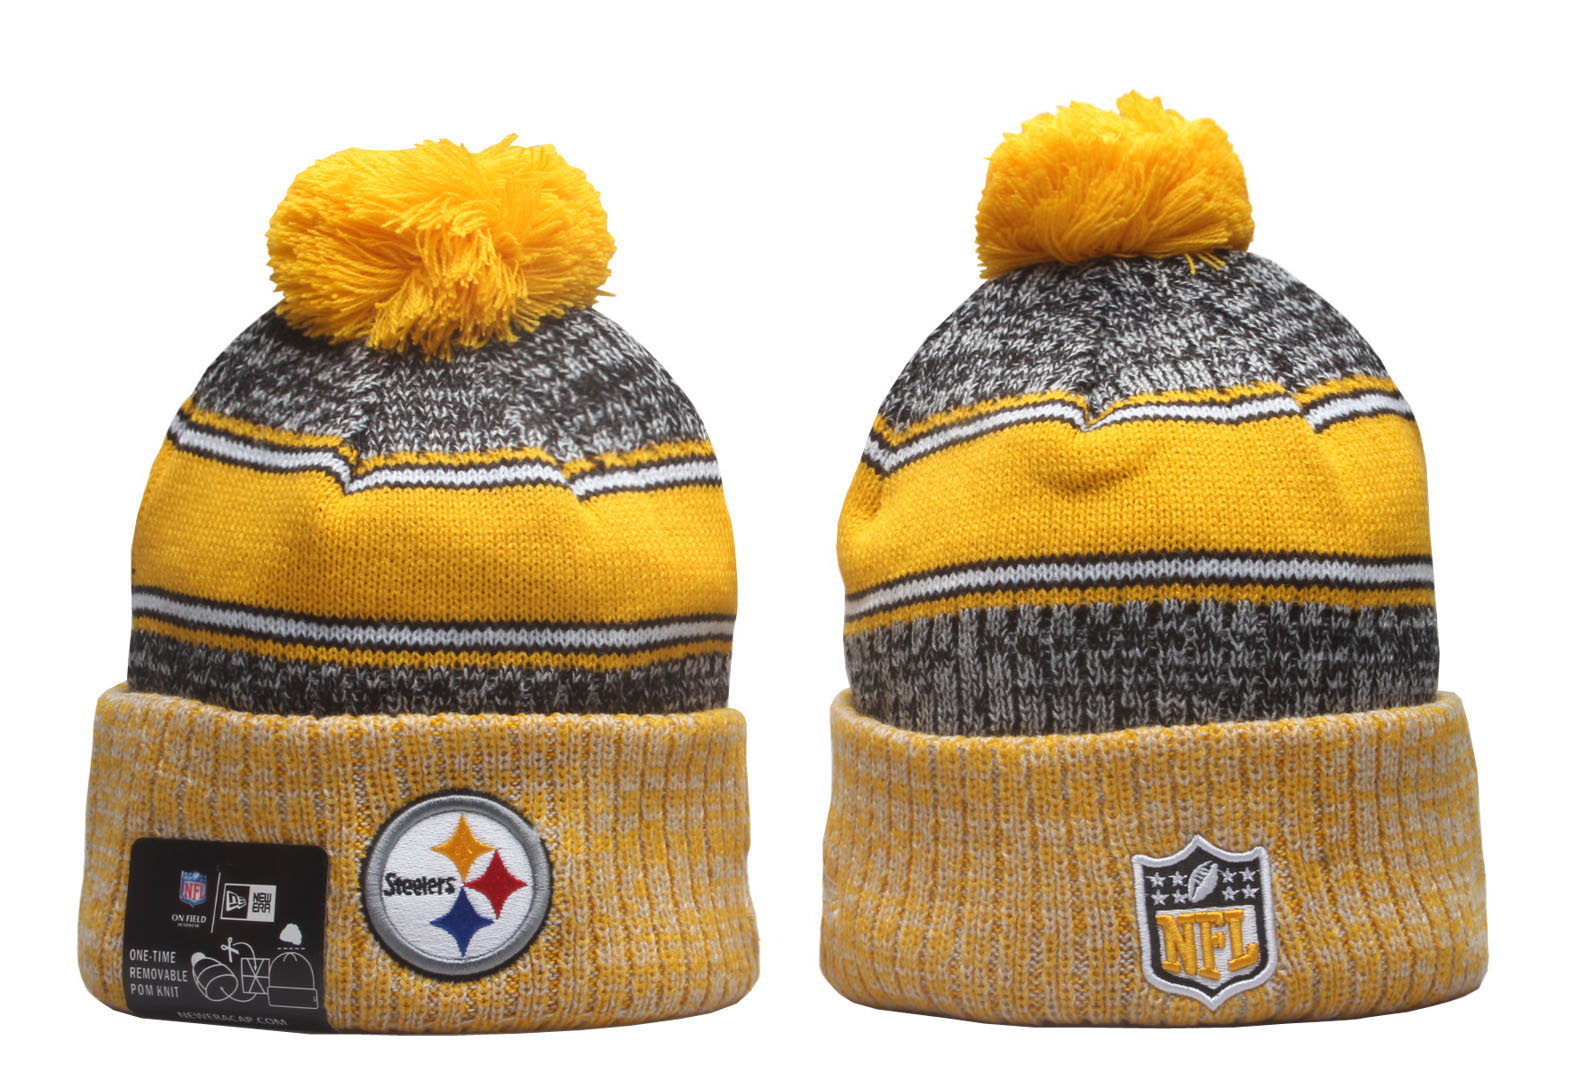 2023 NFL Beanies37->pittsburgh steelers->NFL Jersey